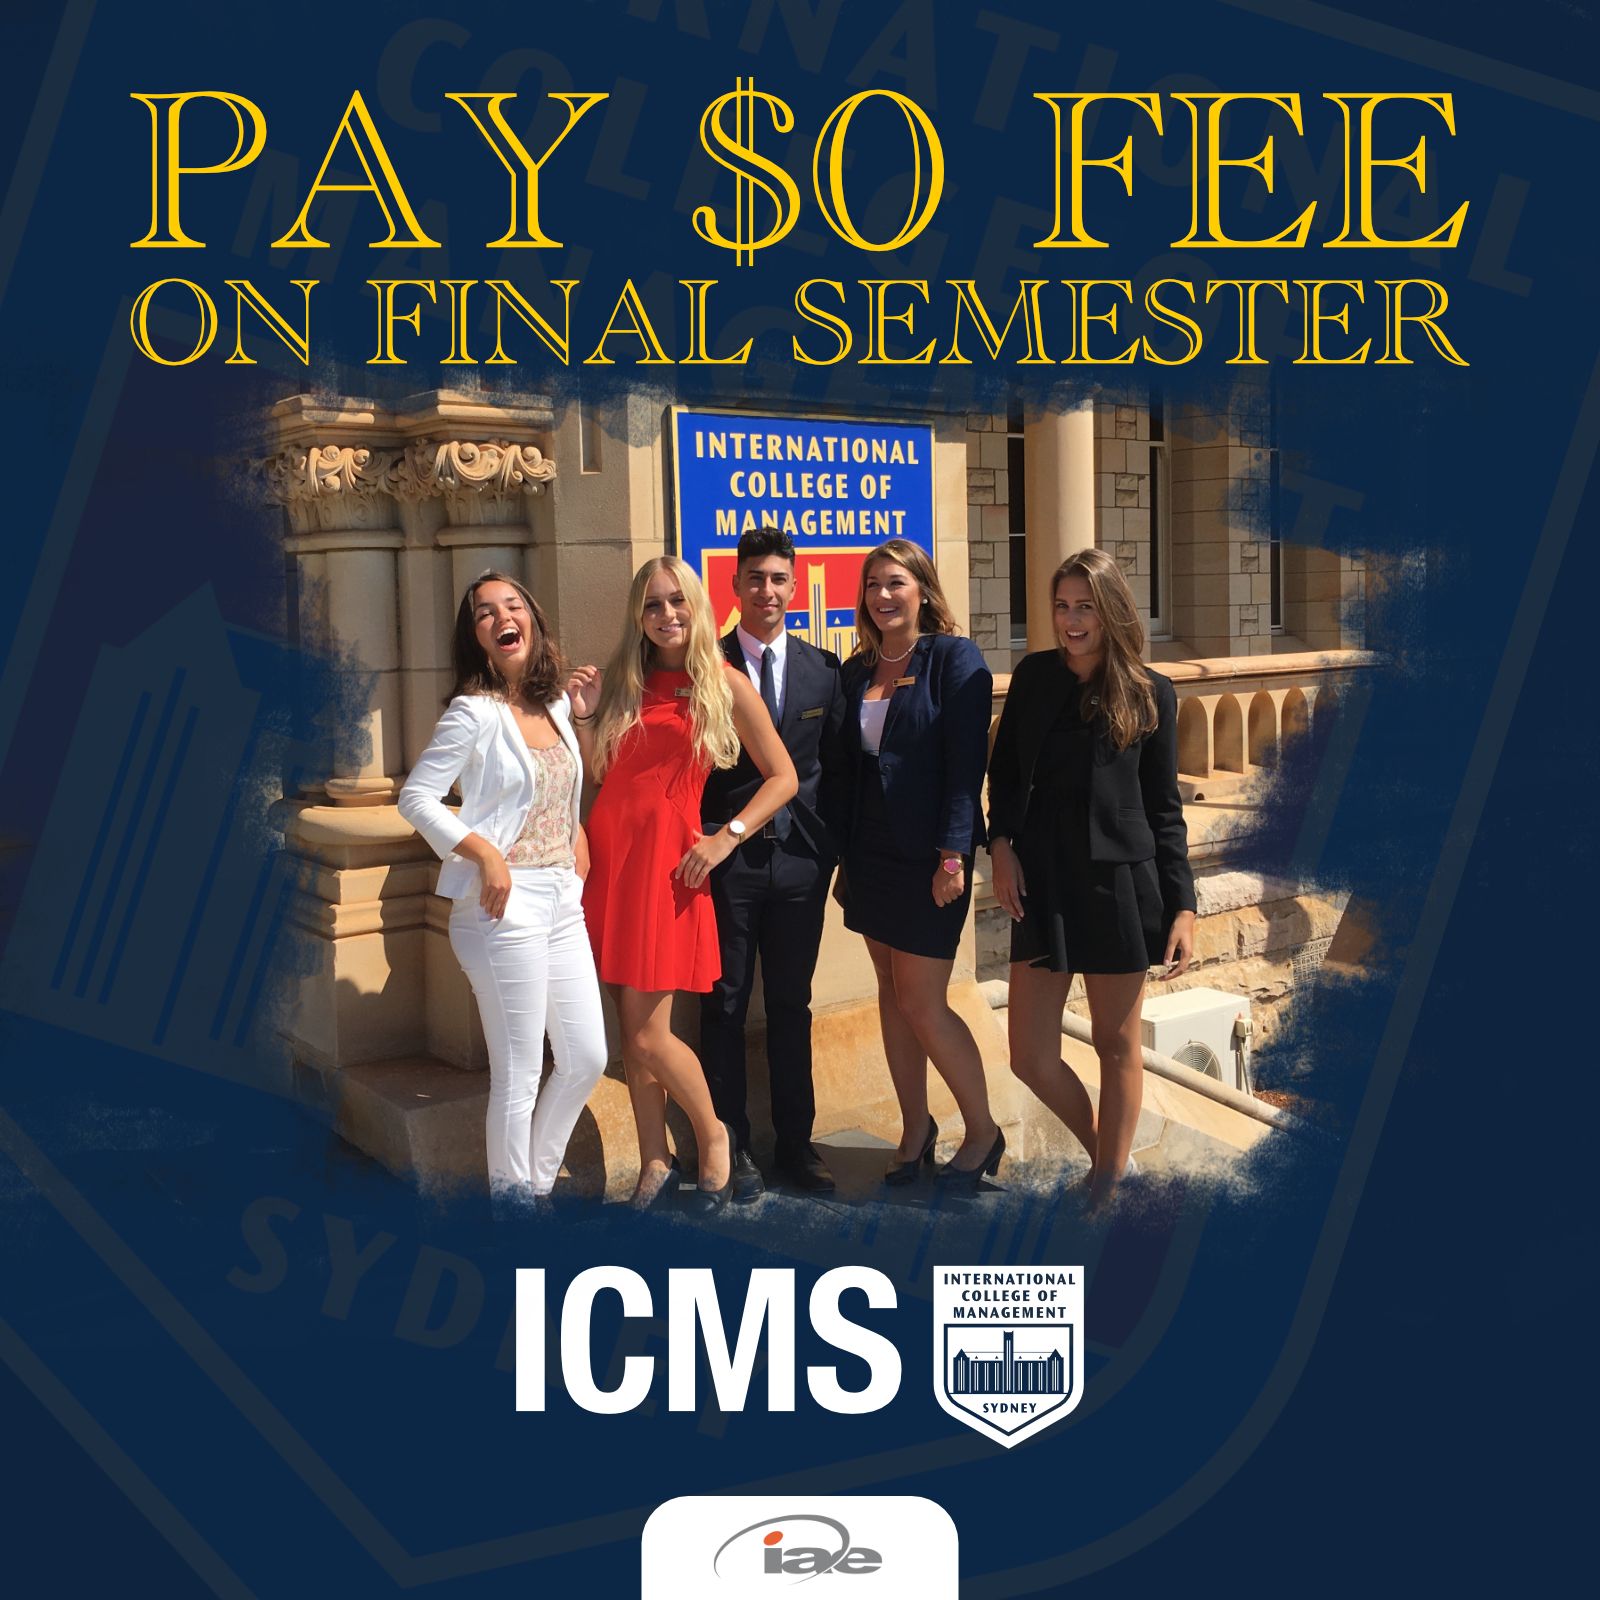 Pay $0 for your final semester of studies when you do your Master's degree at ICMS, Sydney